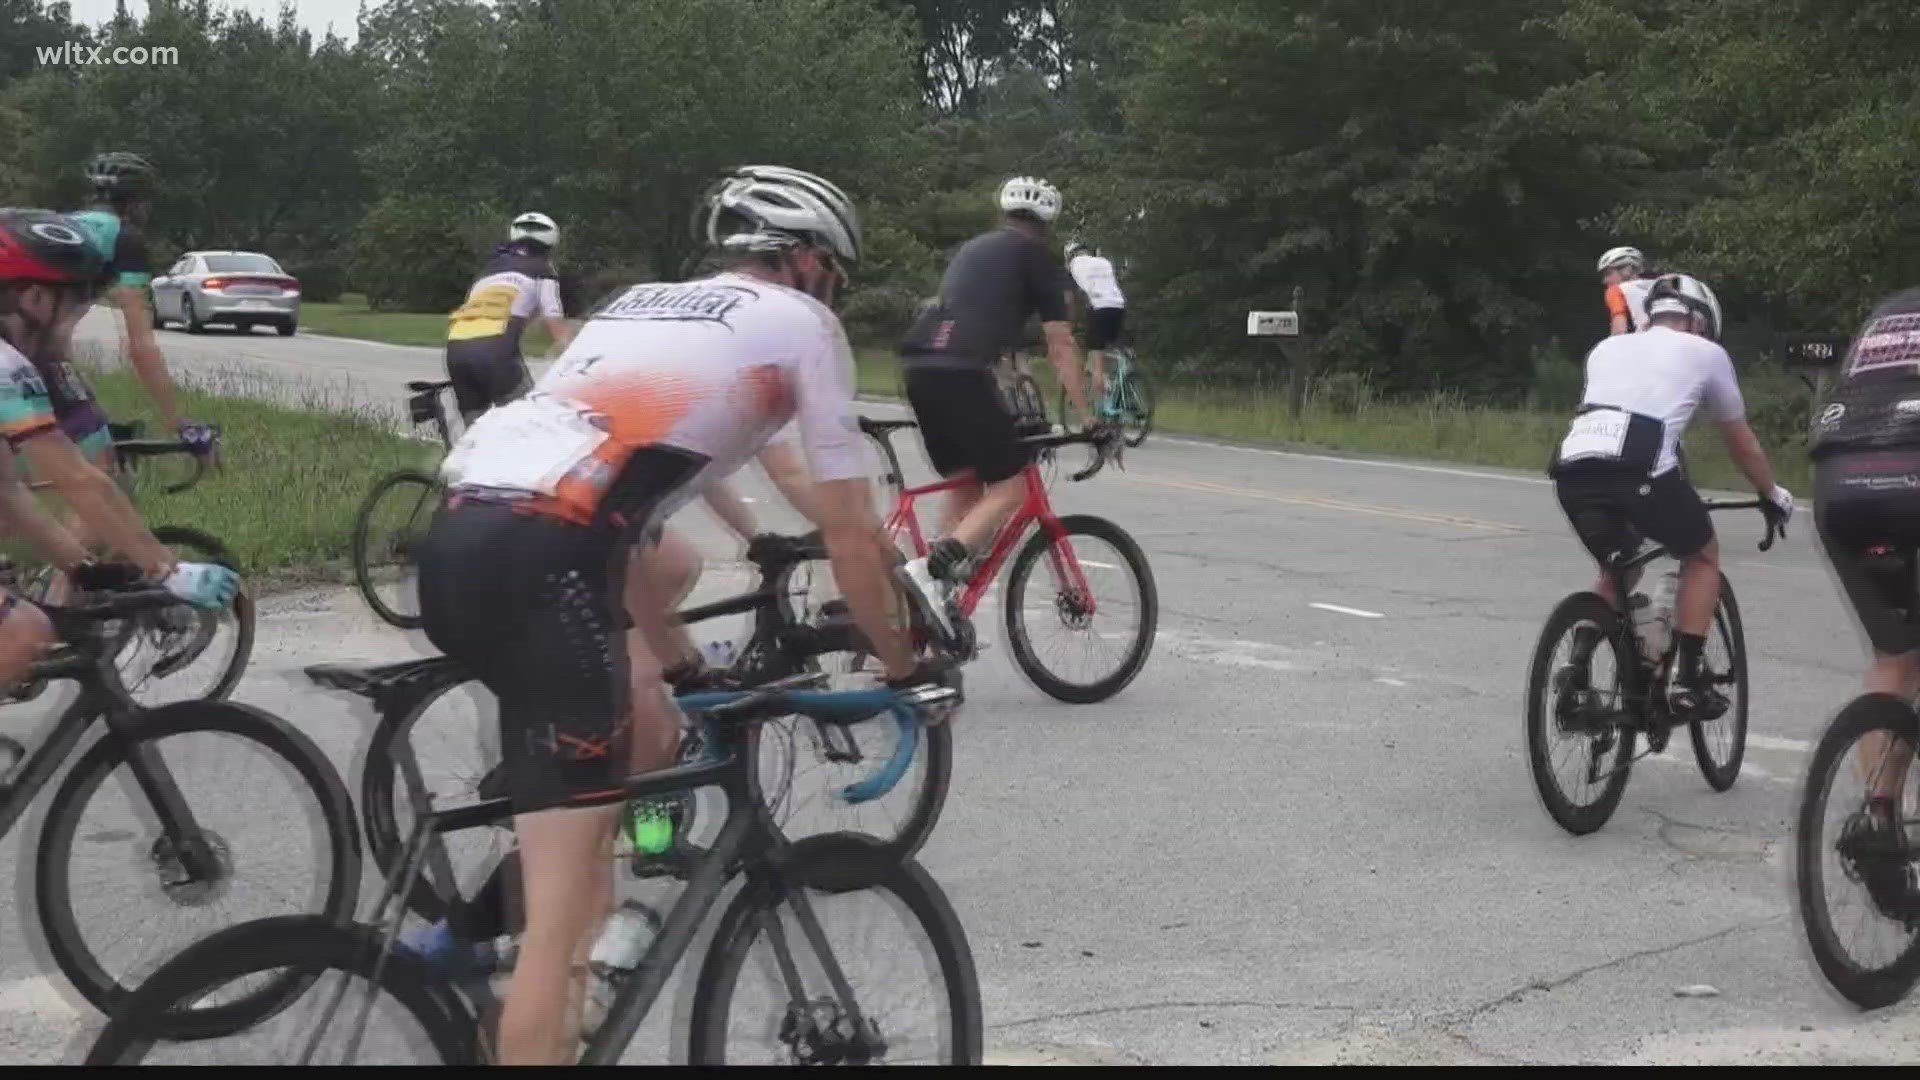 Bikers are riding toward the hope of more awareness and treatments for Alzheimer's and dementia.